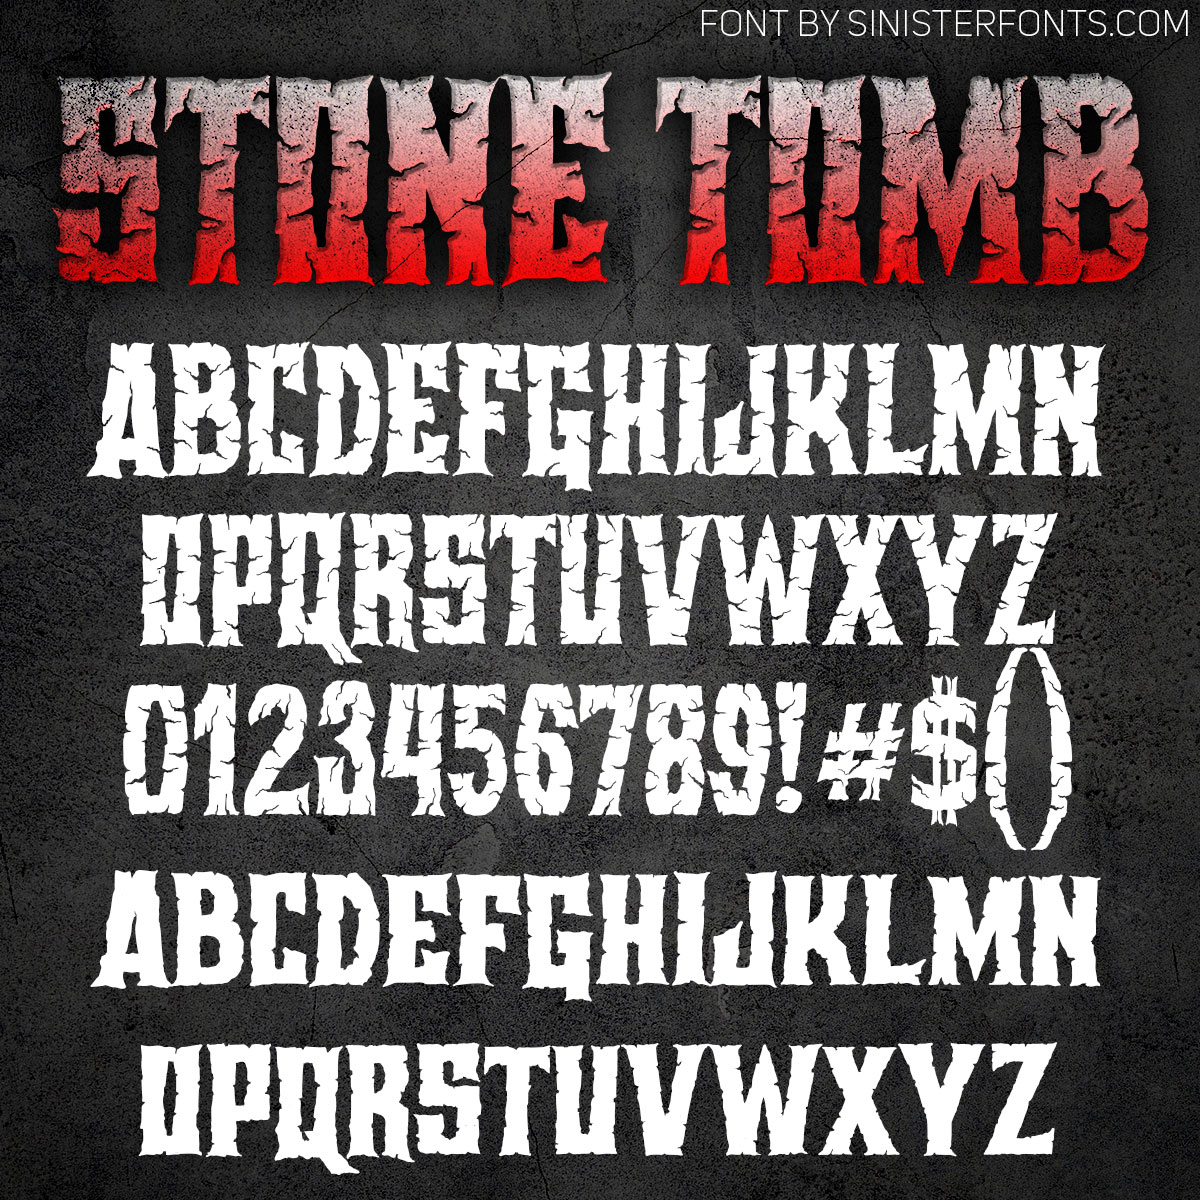 Stone Tomb Font : Click to Download